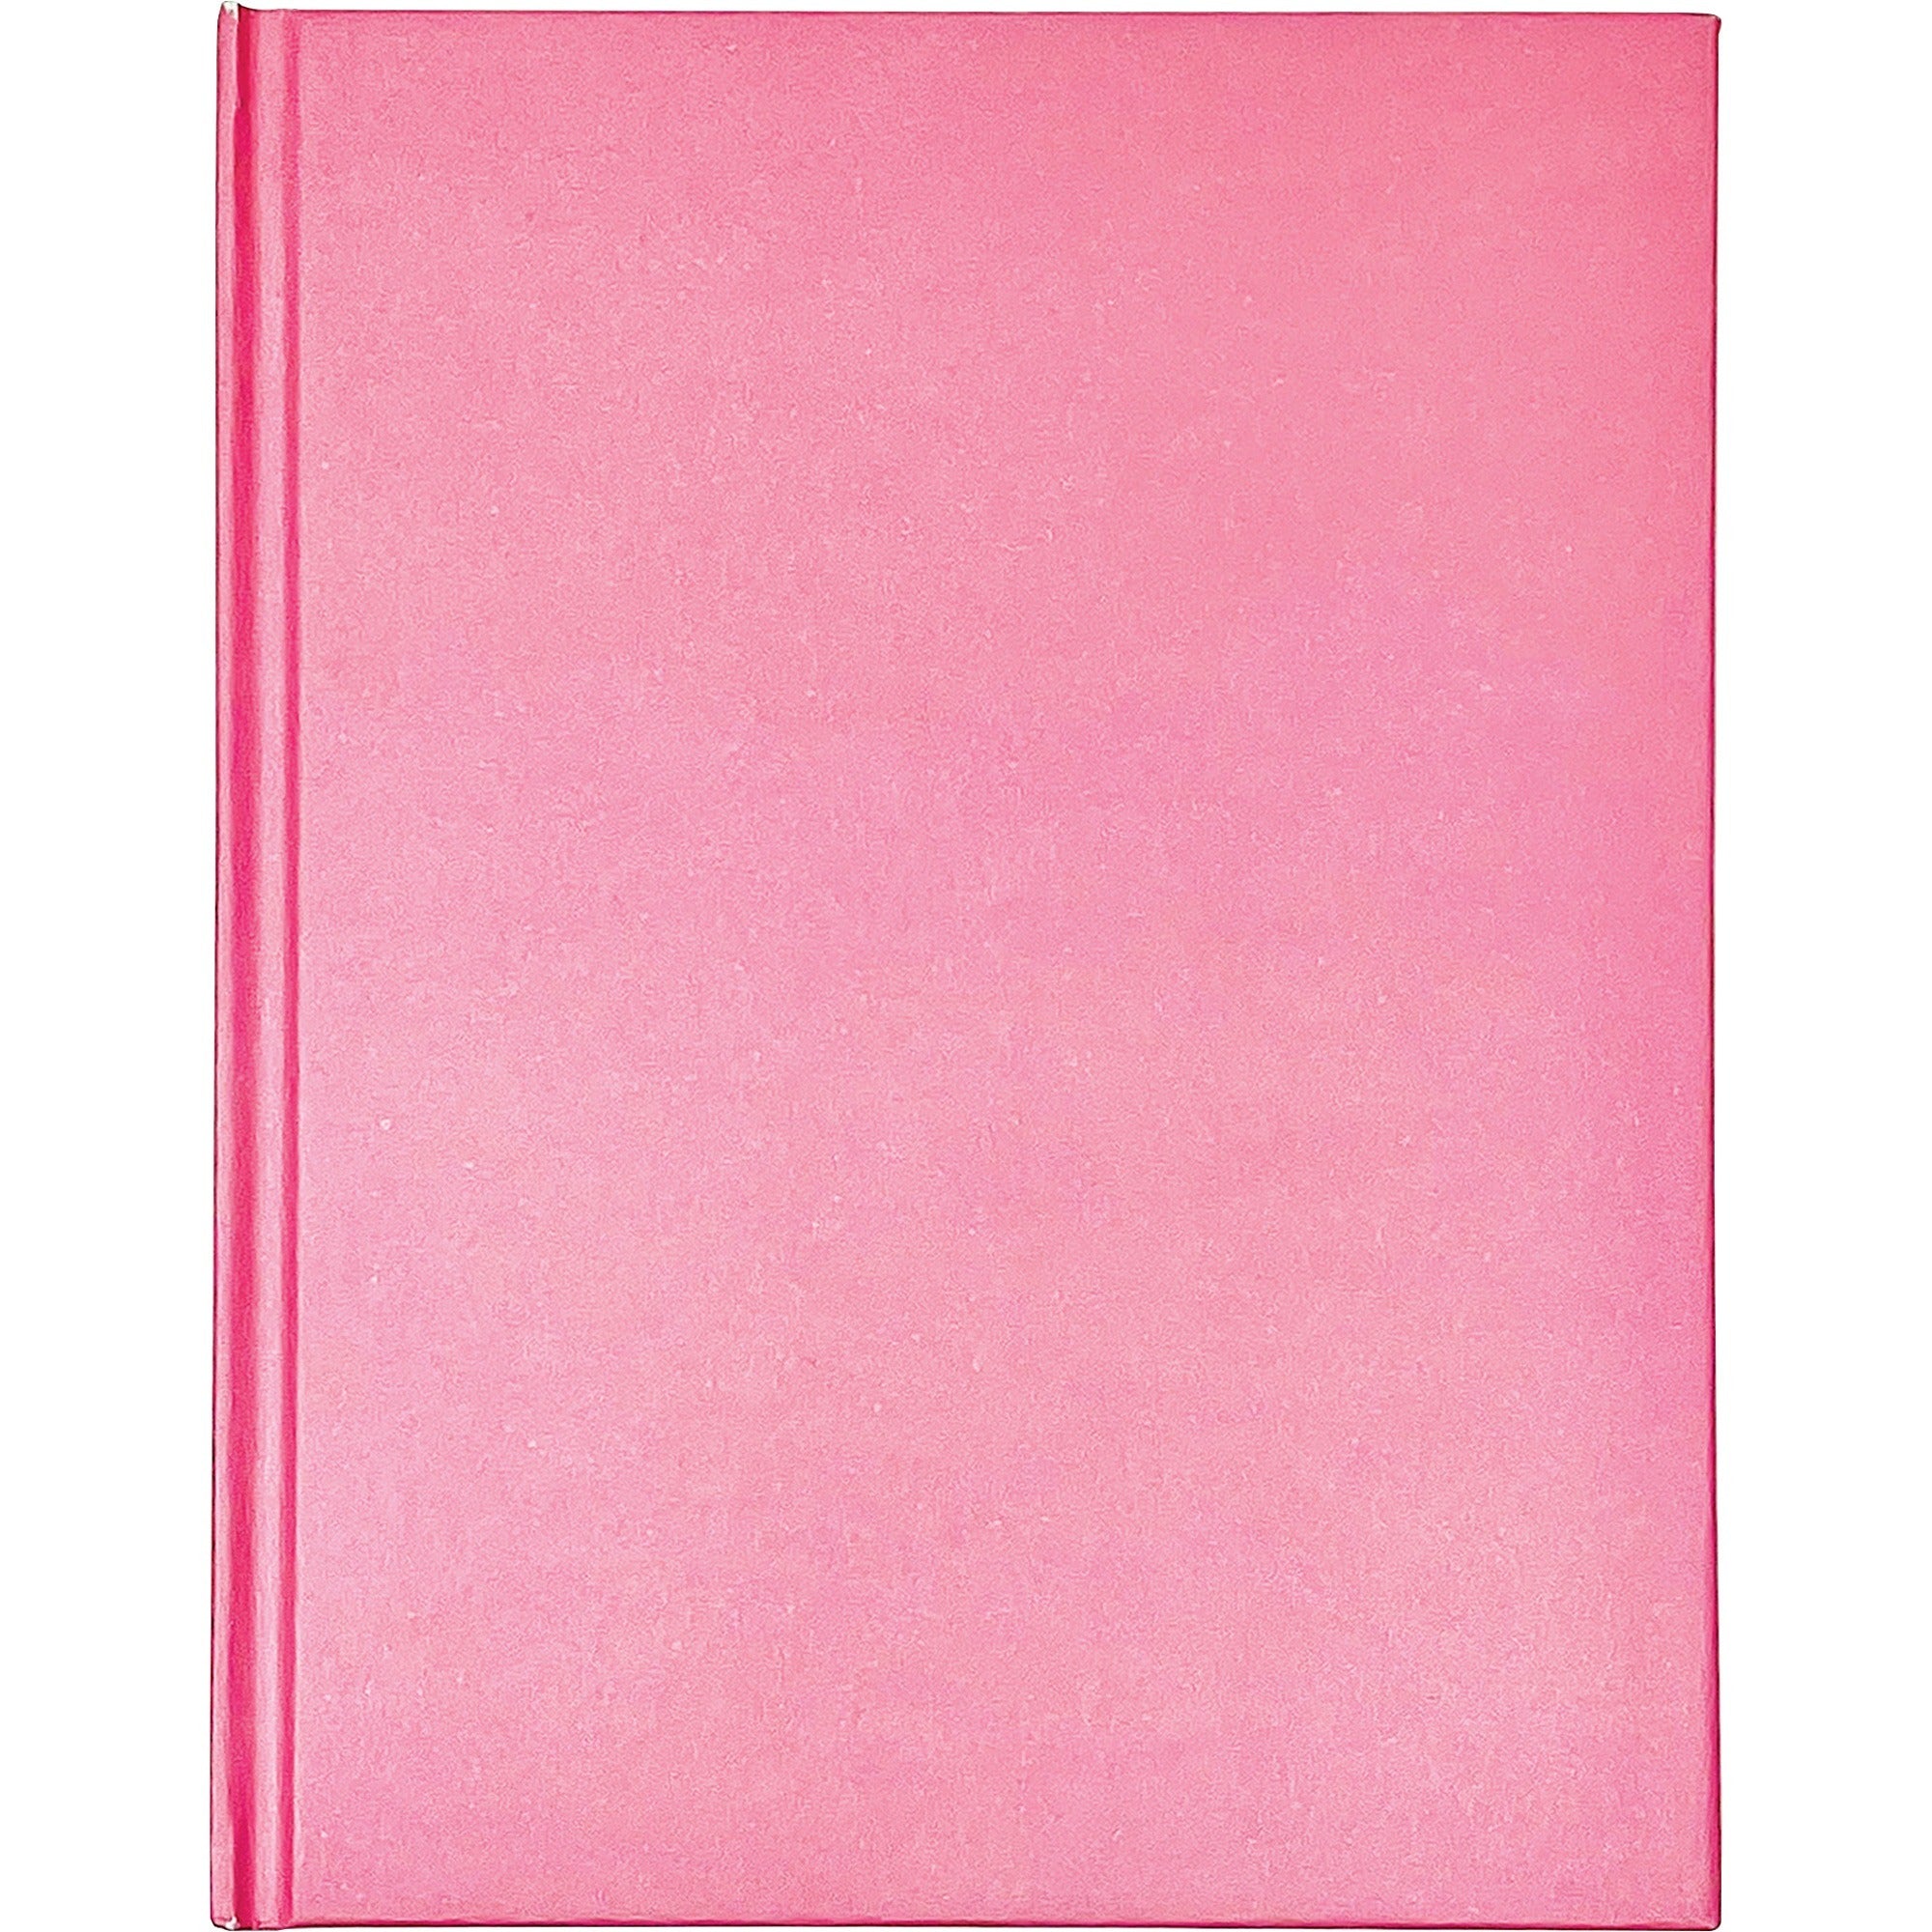 ashley-hardcover-blank-book-28-pages-6-x-8-pink-cover-hard-cover-durable-1-each_ash10713 - 2